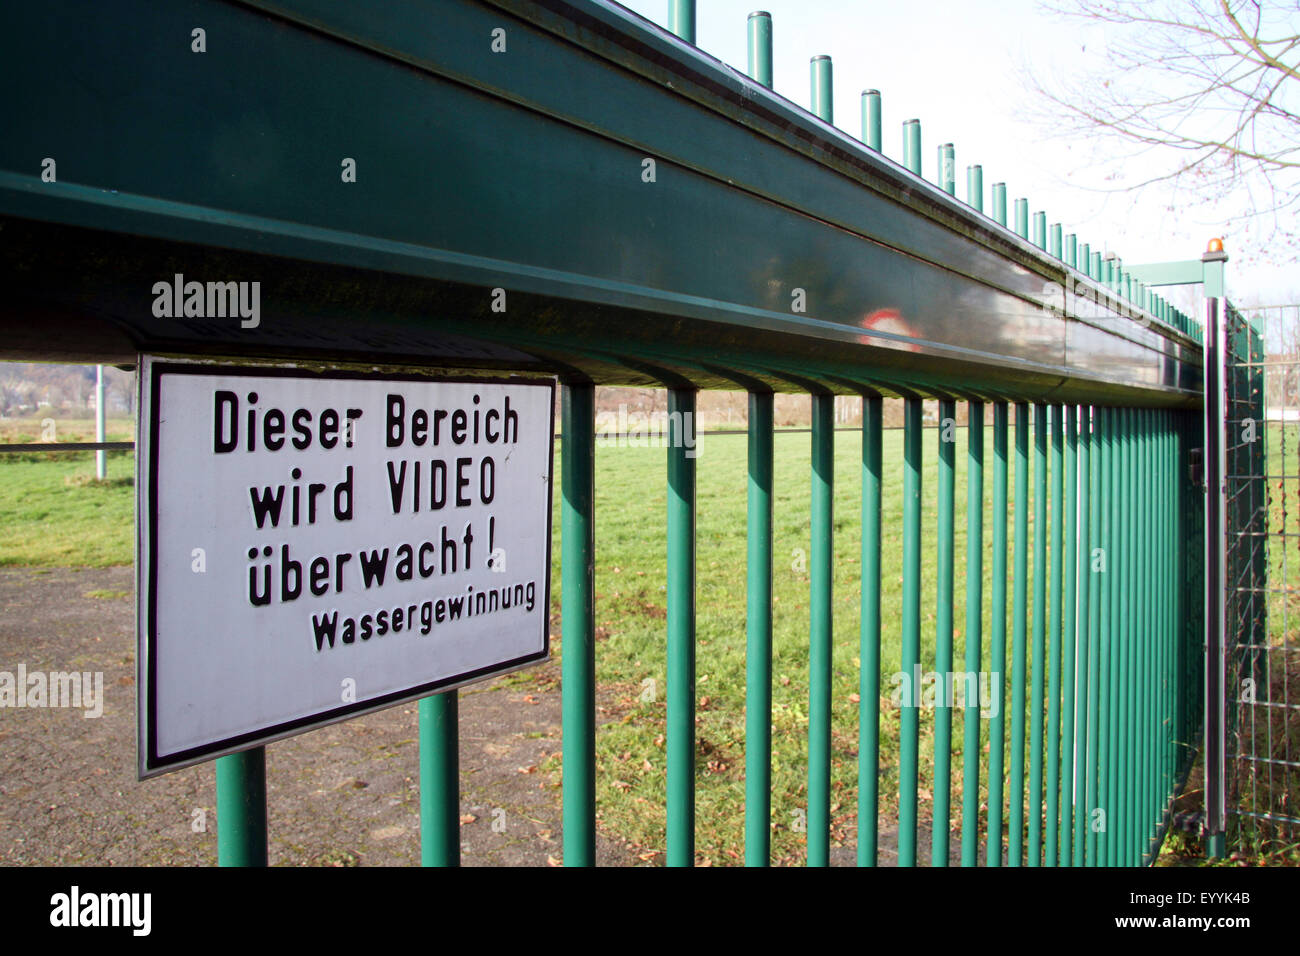 gate to water treatment under video surveillance, Germany Stock Photo